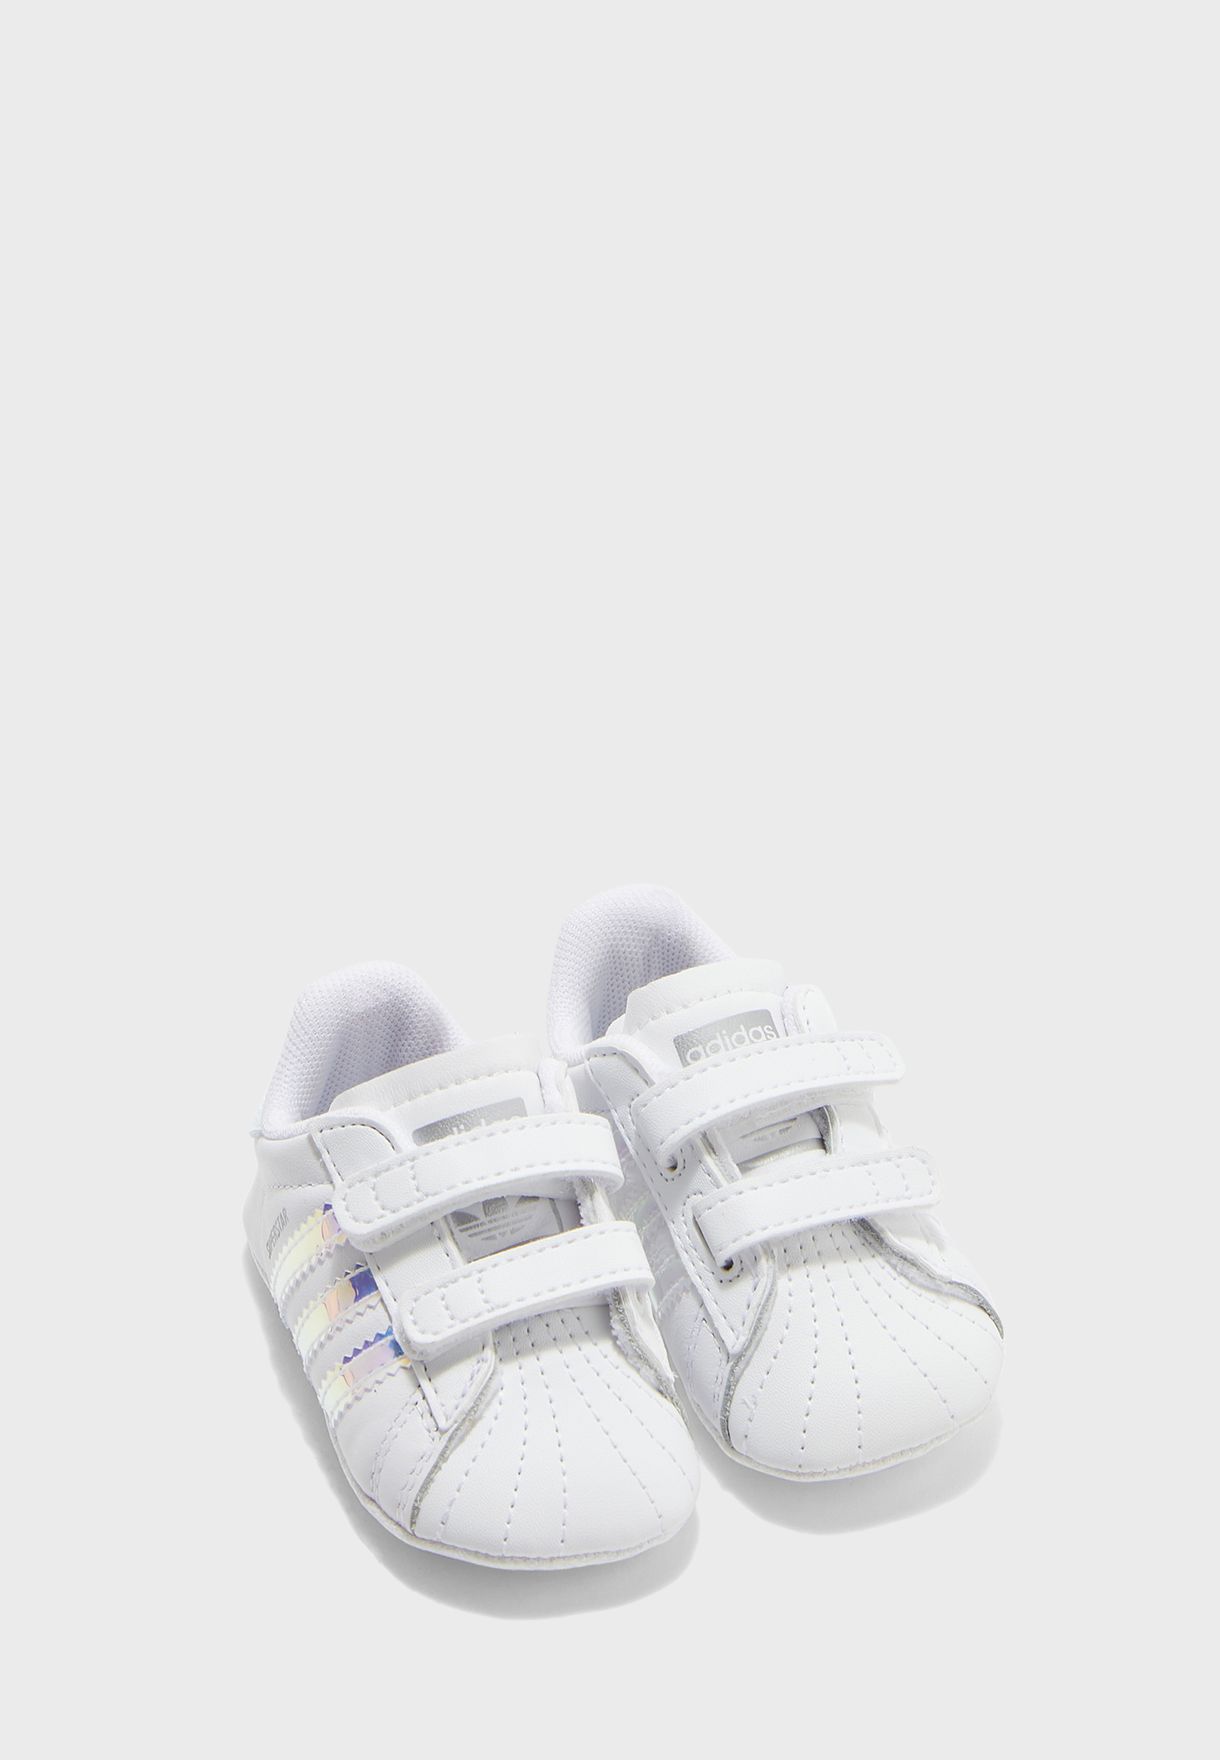 Superstar Casual Kids Crib Shoes